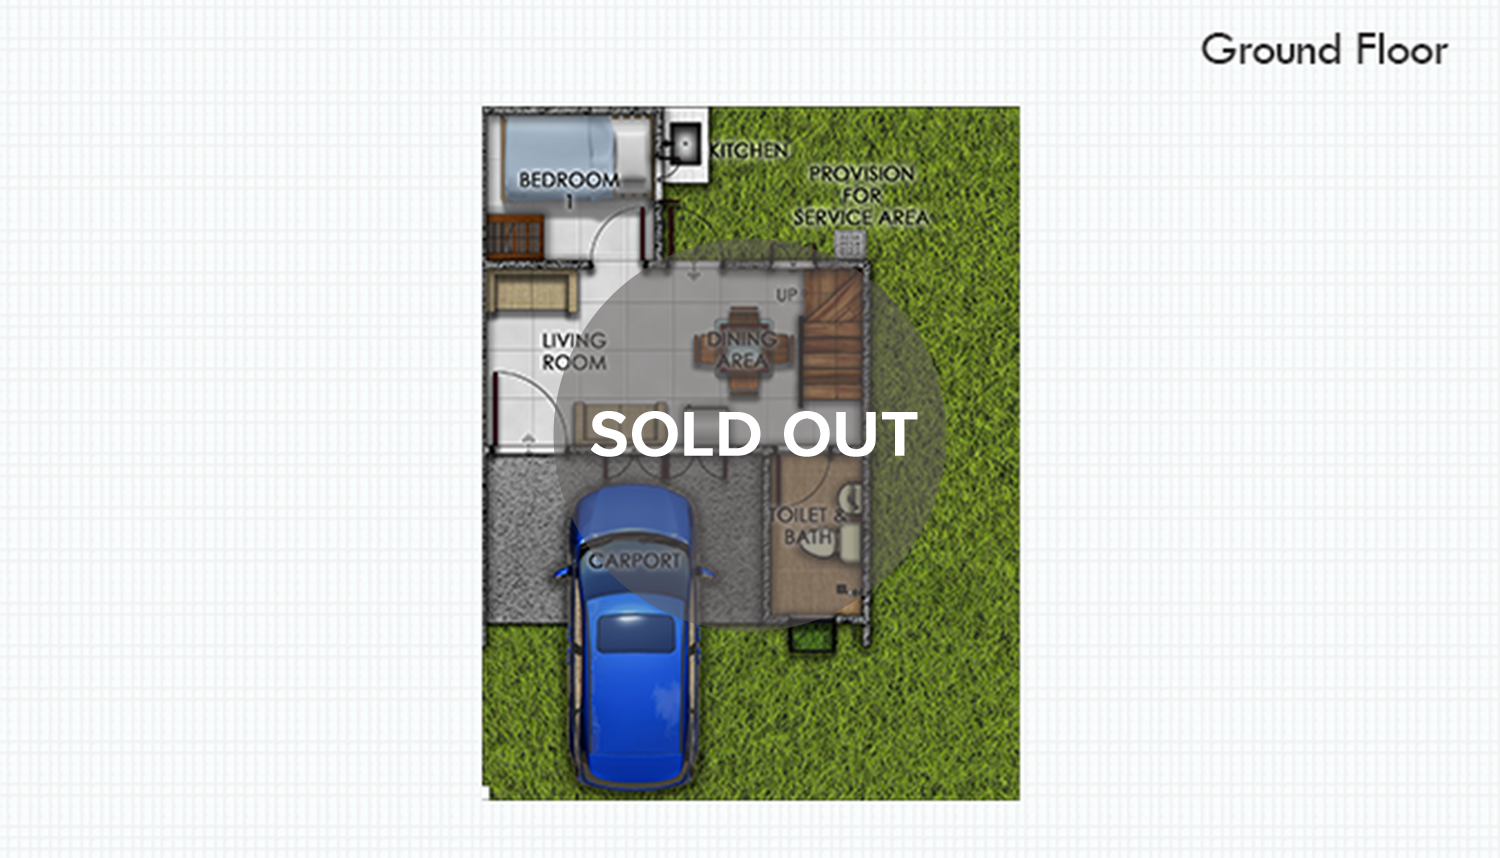 /assets/properties-house-model-gallery-and-landmarks-icons/lumina-home-models/home-model-gallery/athena-duplex/lumina-athena-duplex-ground-floor-plan-sold-out.png